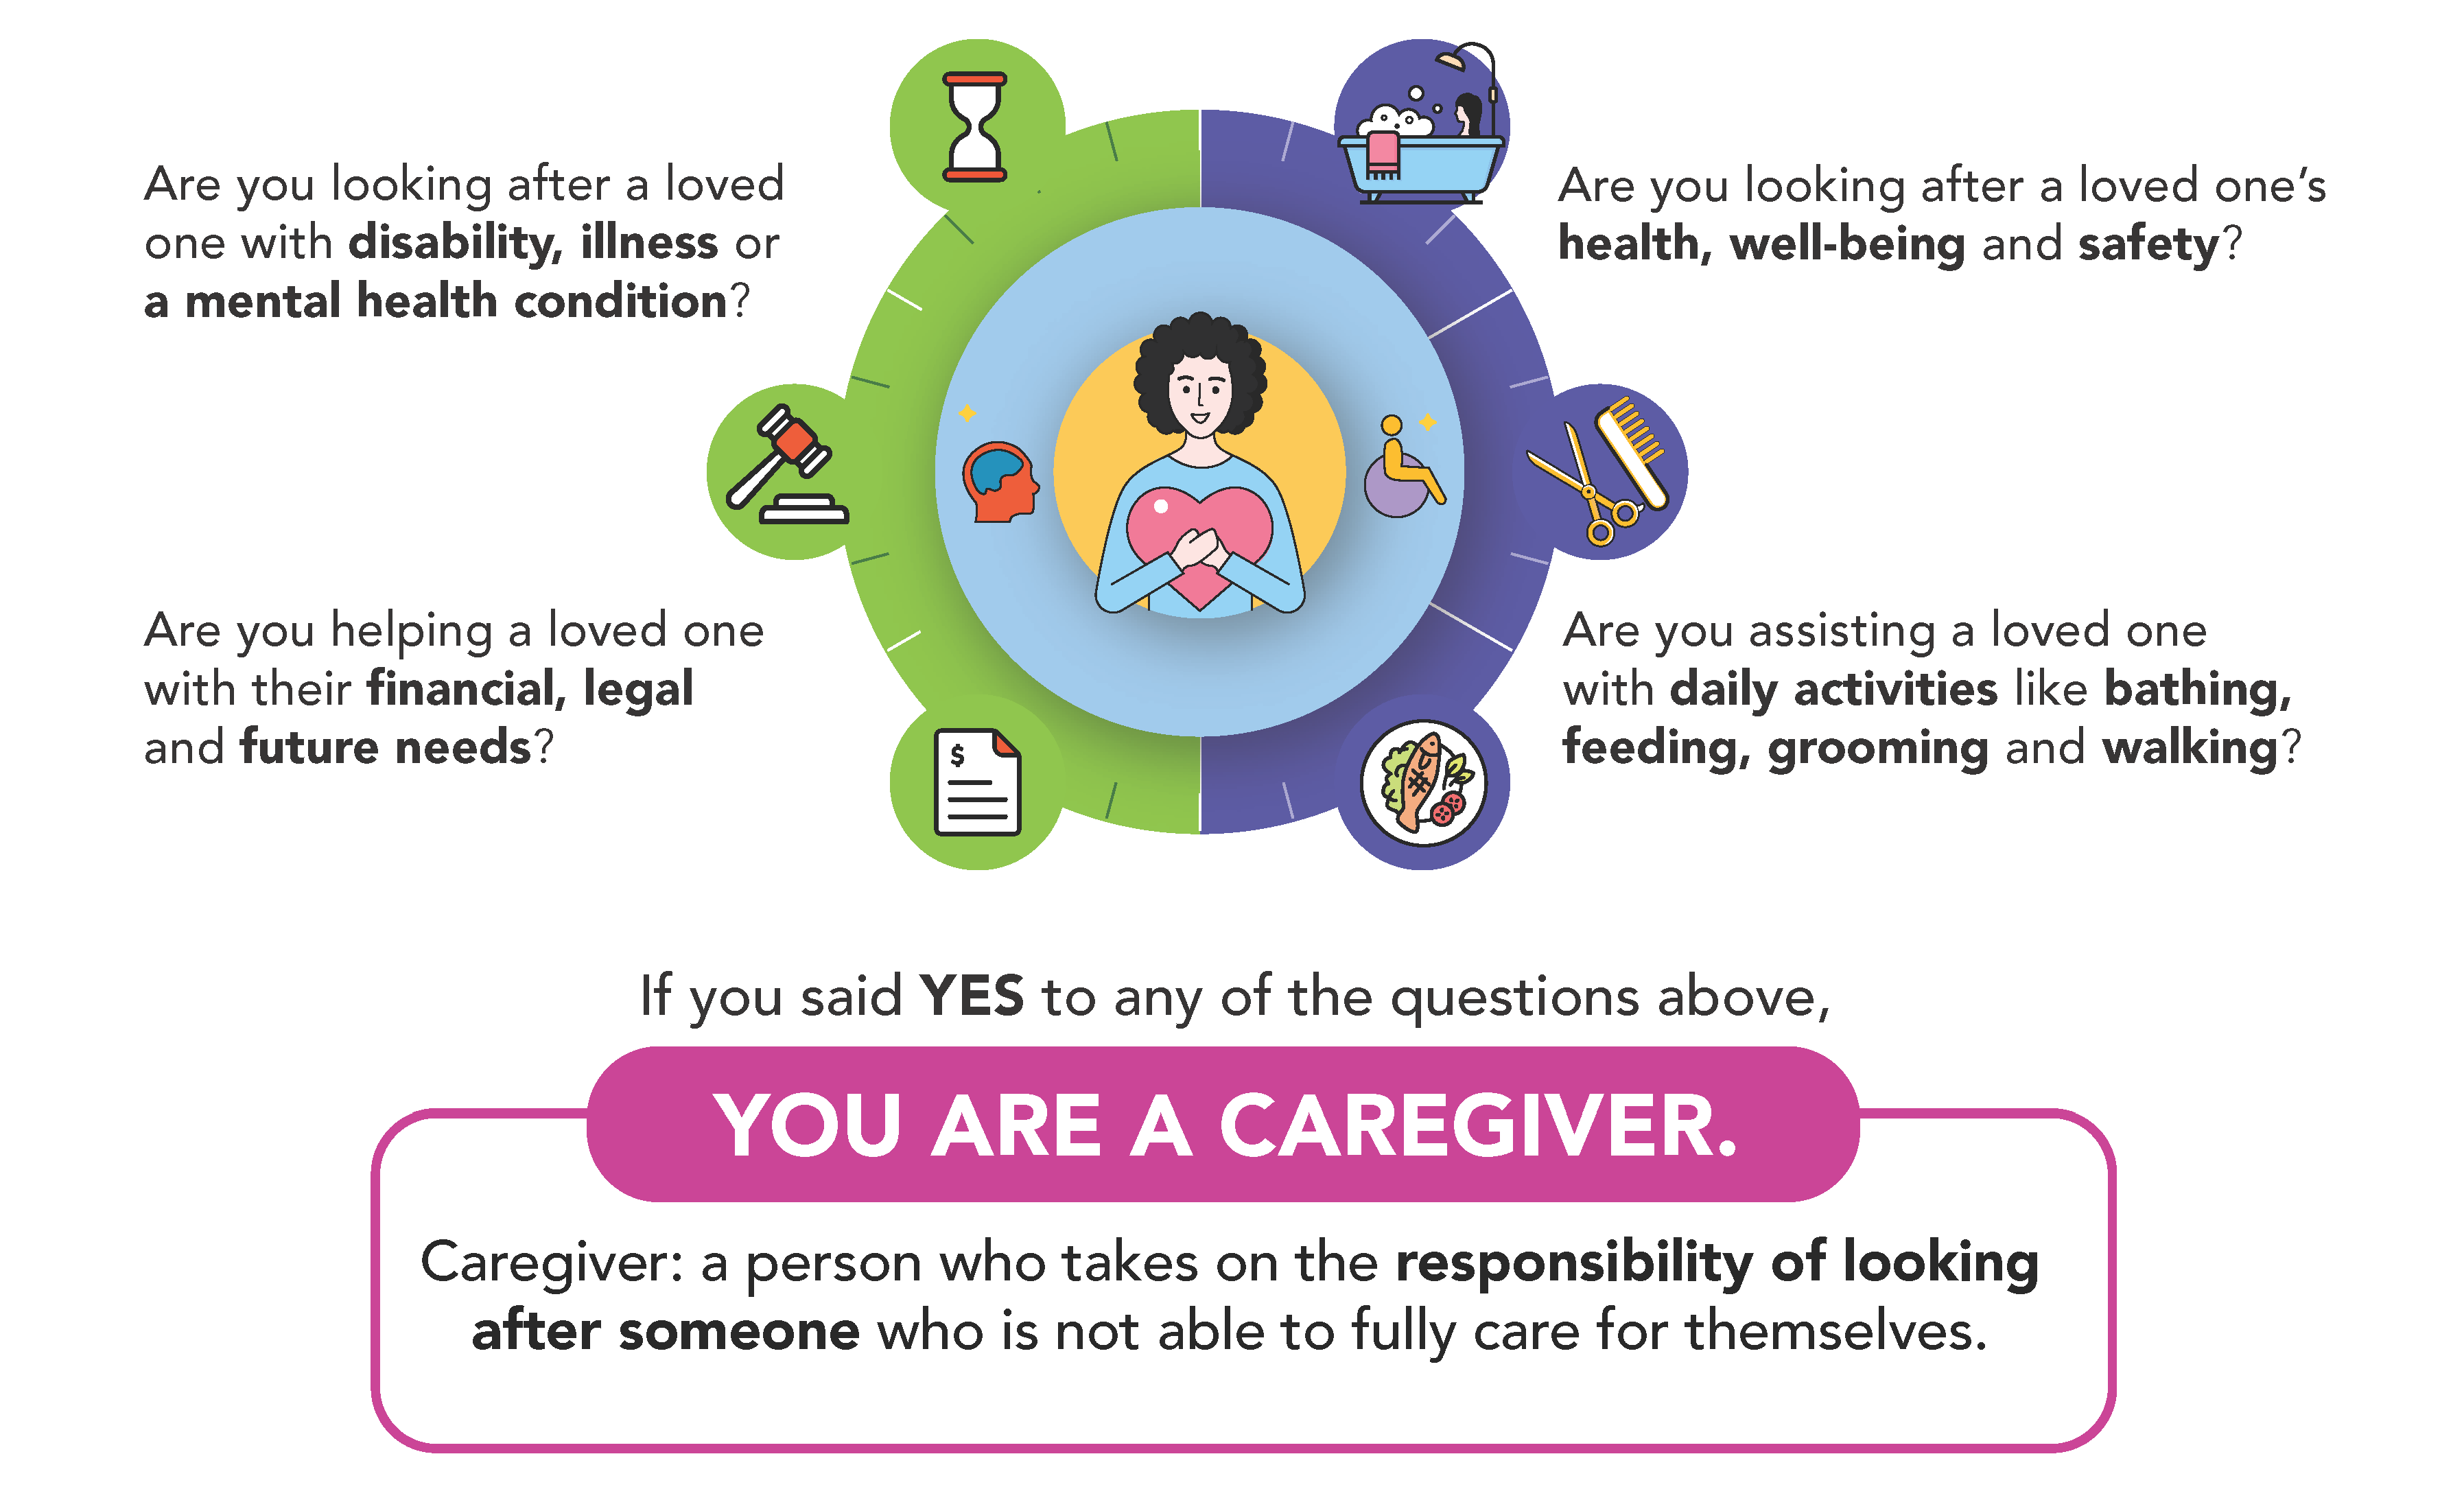 Definition of a caregiver is a person who takes on the responsibility of looking after someone who is not able to fully care for themselves including (1) those with disability, illness or a mental health condition, (2) looking after their health, safety, and well-being, (3) helping them with financial, legal, and future needs, (4) assisting with their daily activities like bathing, feeding, grooming, and walking. Pace yourself and take breaks, tap on schemes and grants, seek support from friends and family. 